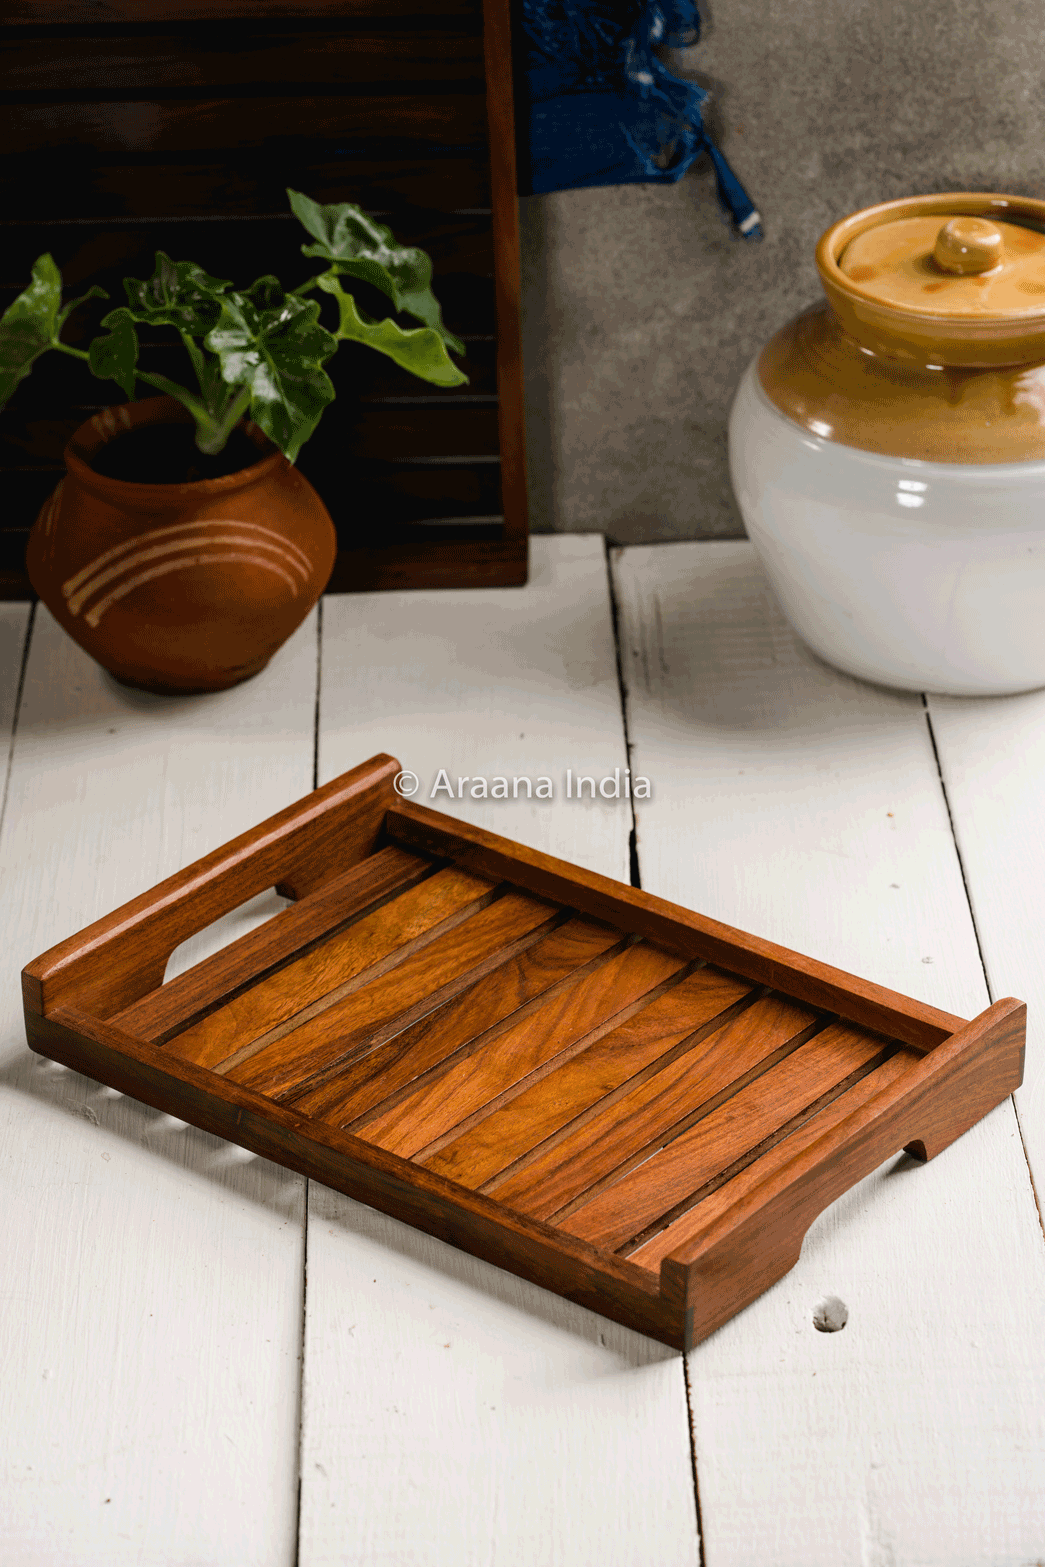 Thumbnail preview #0 for Dhaari - Striped wooden serving tray